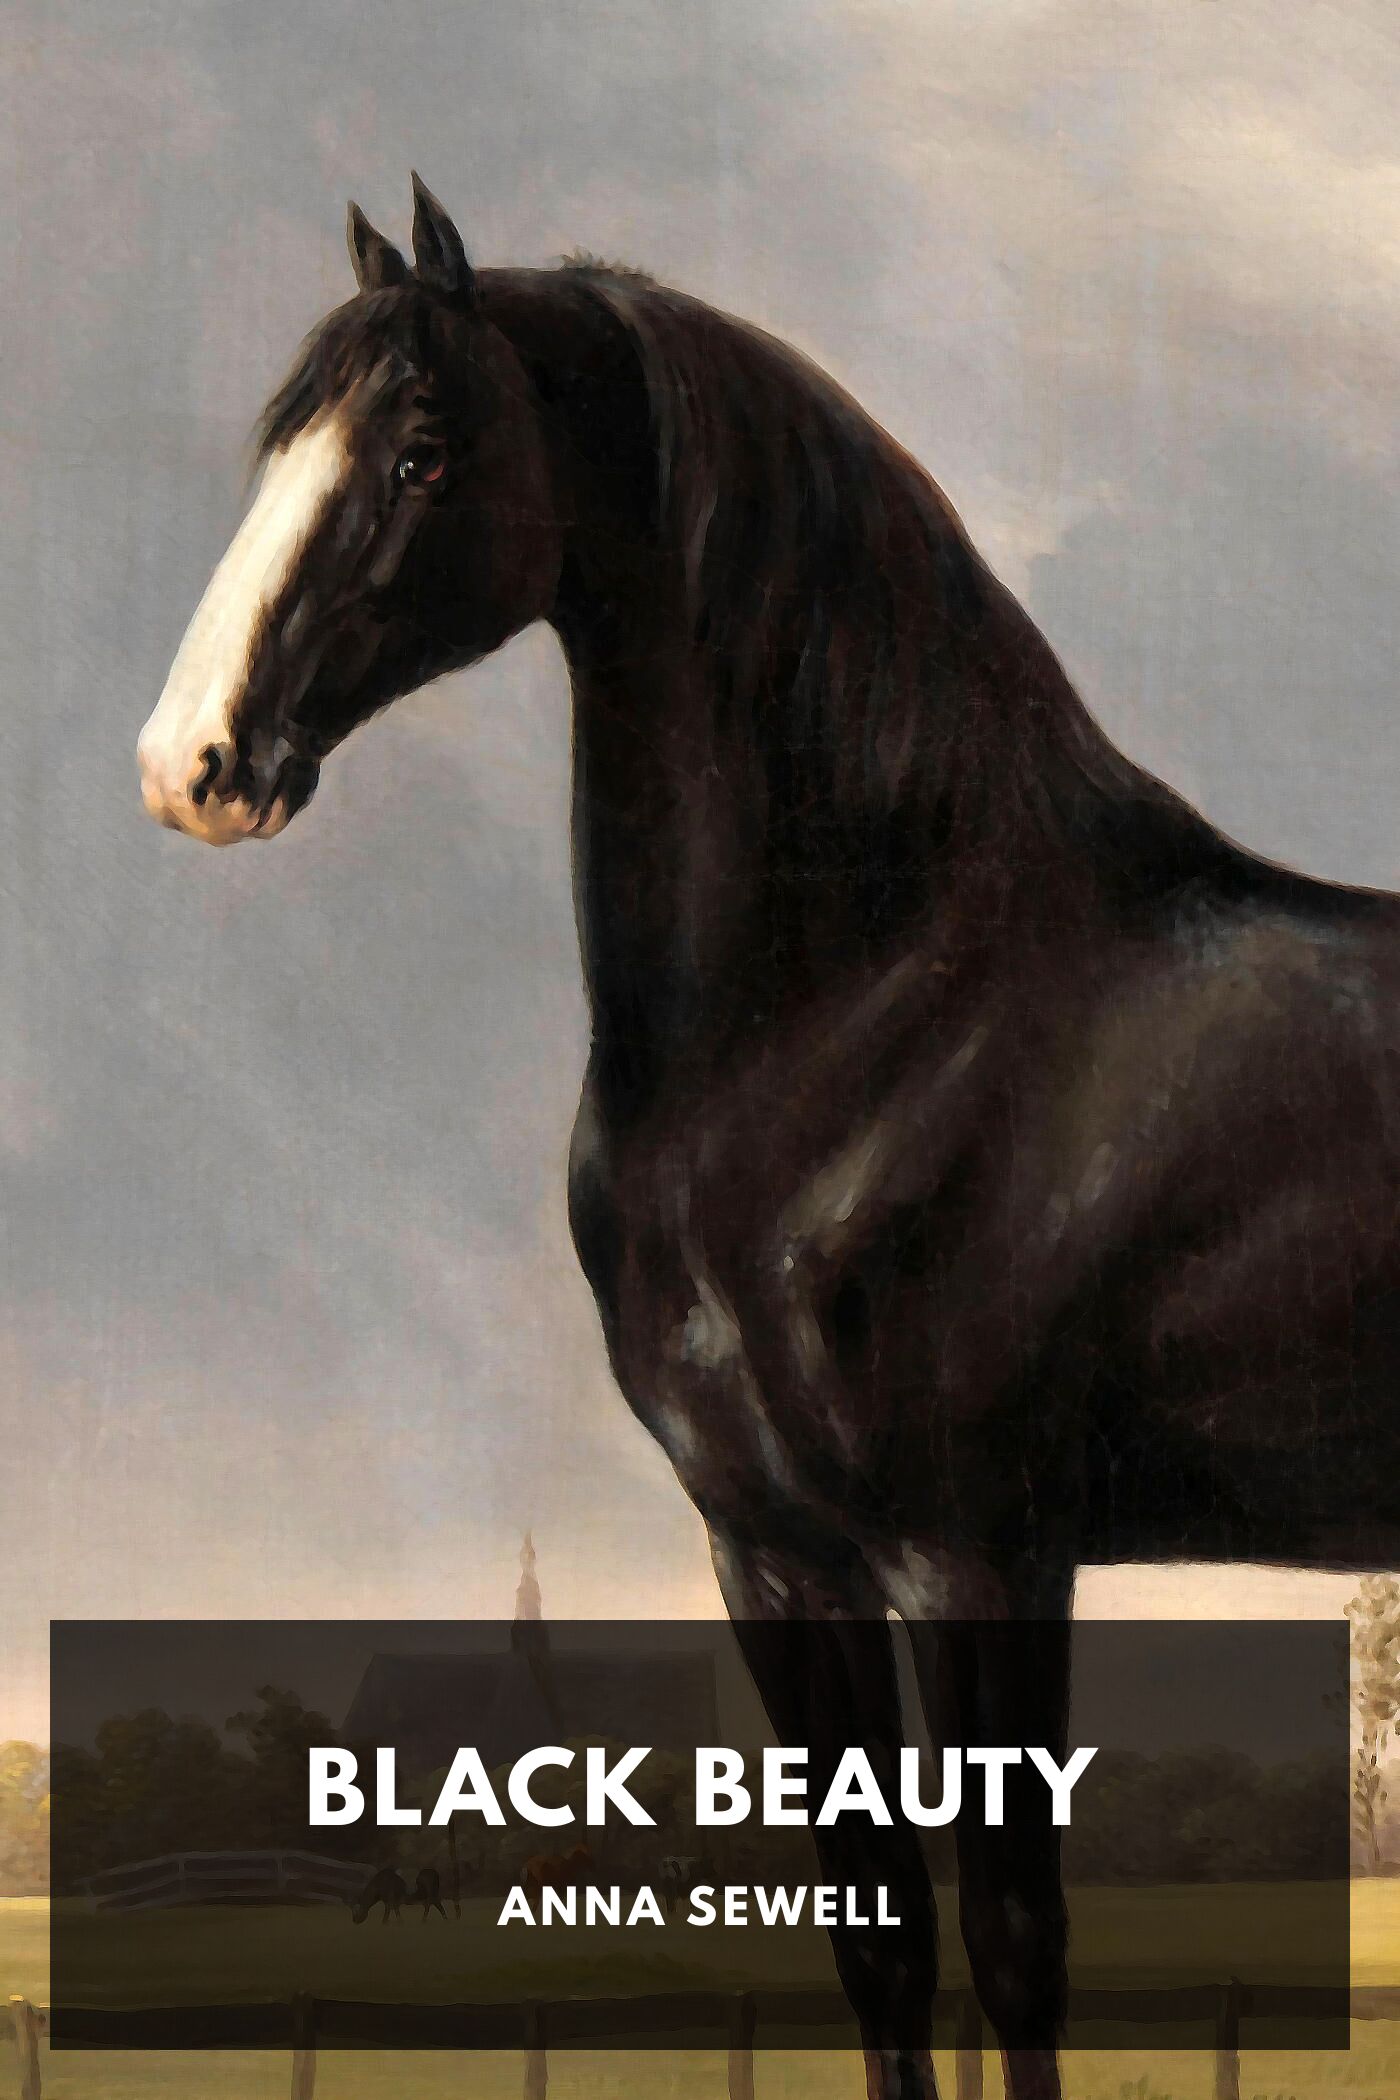 black beauty story book free download